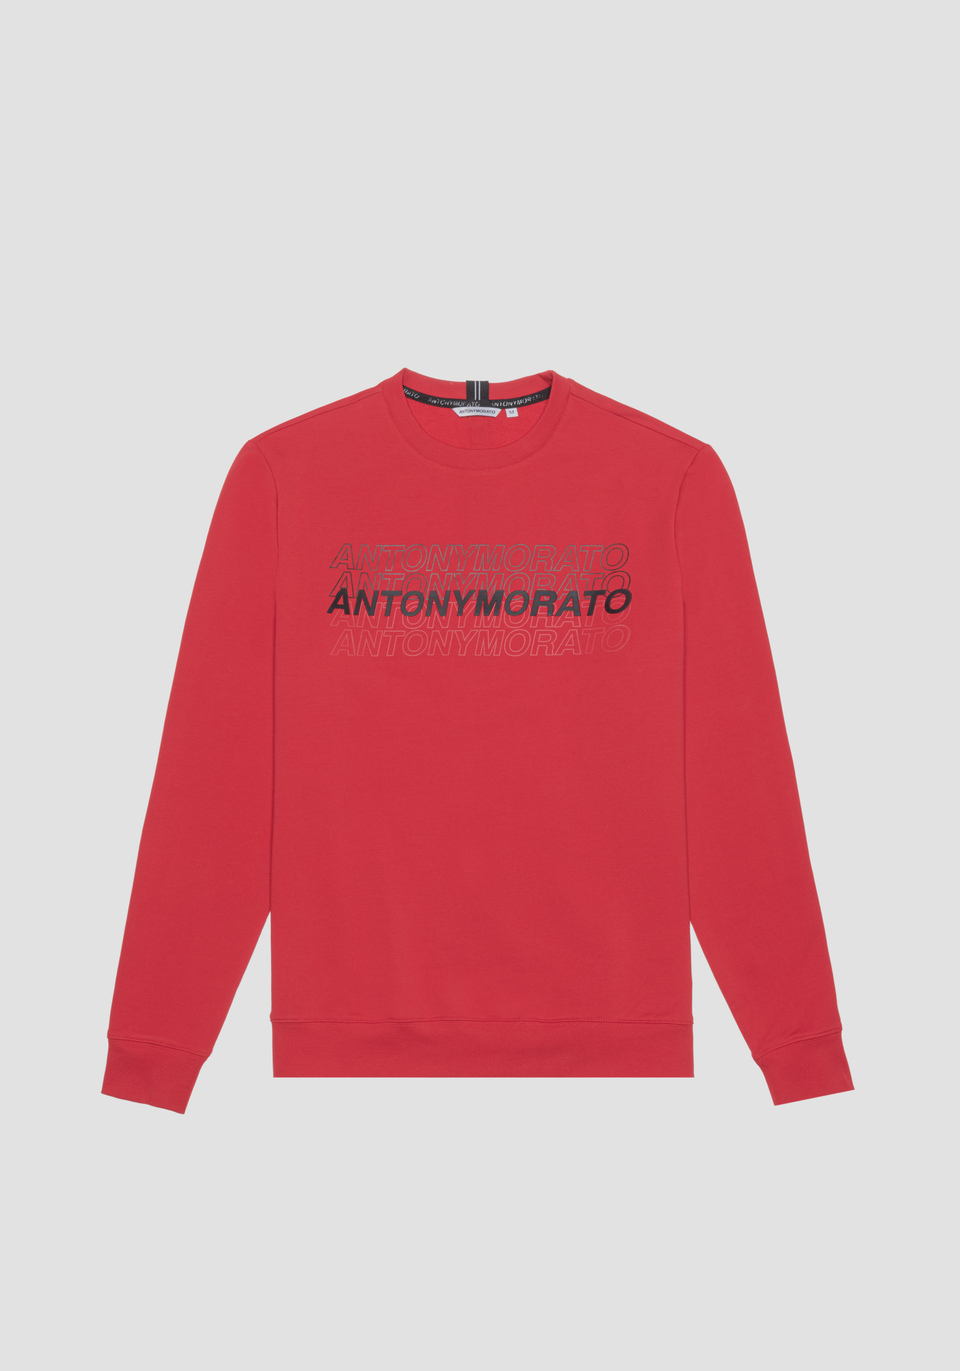 SLIM FIT SWEATSHIRT IN SOFT STRETCH COTTON WITH CONTRASTING RUBBERISED LOGO PRINT - Antony Morato Online Shop